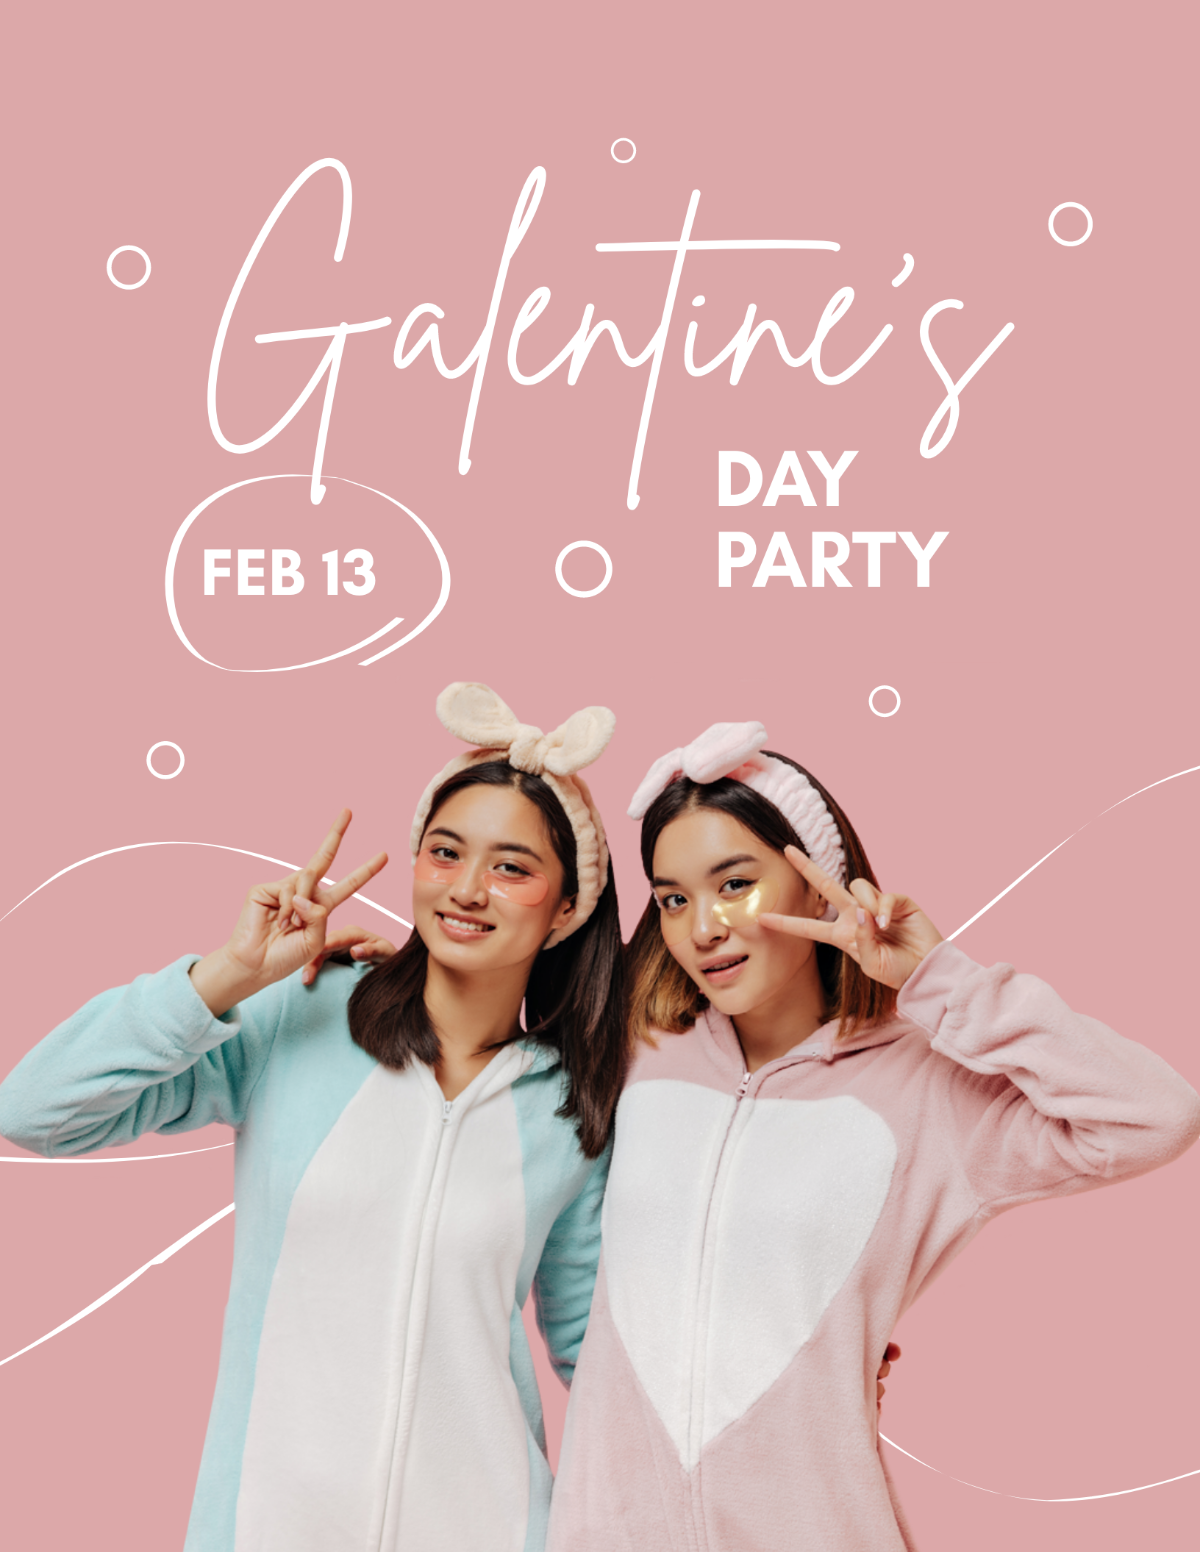 Galentines Day Party Flyer Template